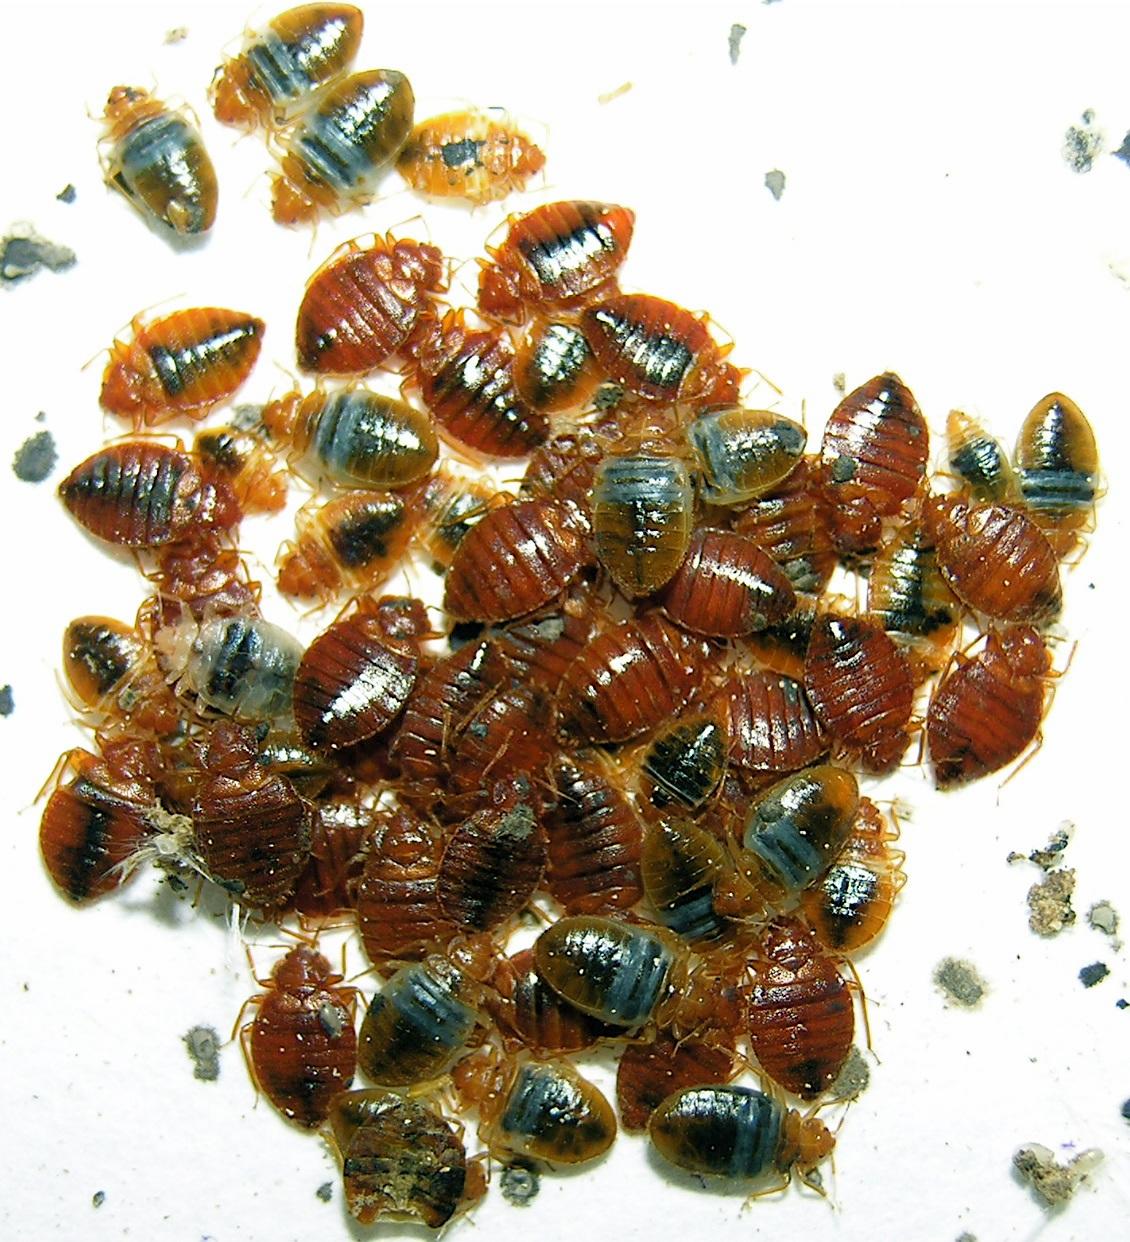 The Worst Bed Bug Infestation Caught On Video Part 1 Bed Bug Guide